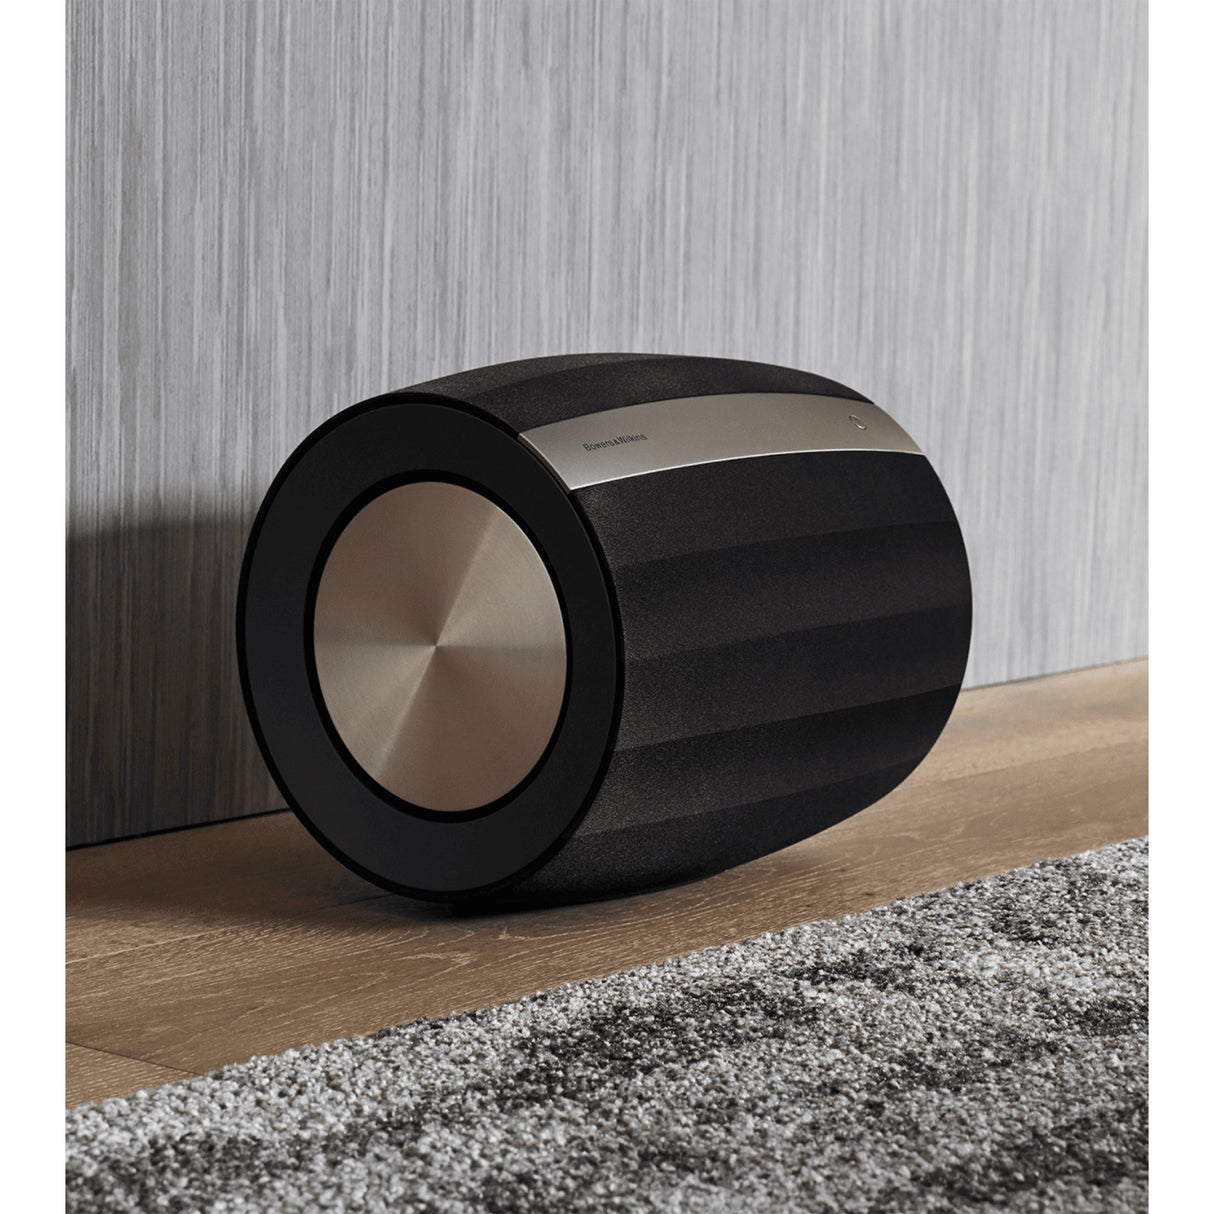 Bowers & Wilkins - Formation Bass Wireless Subwoofer